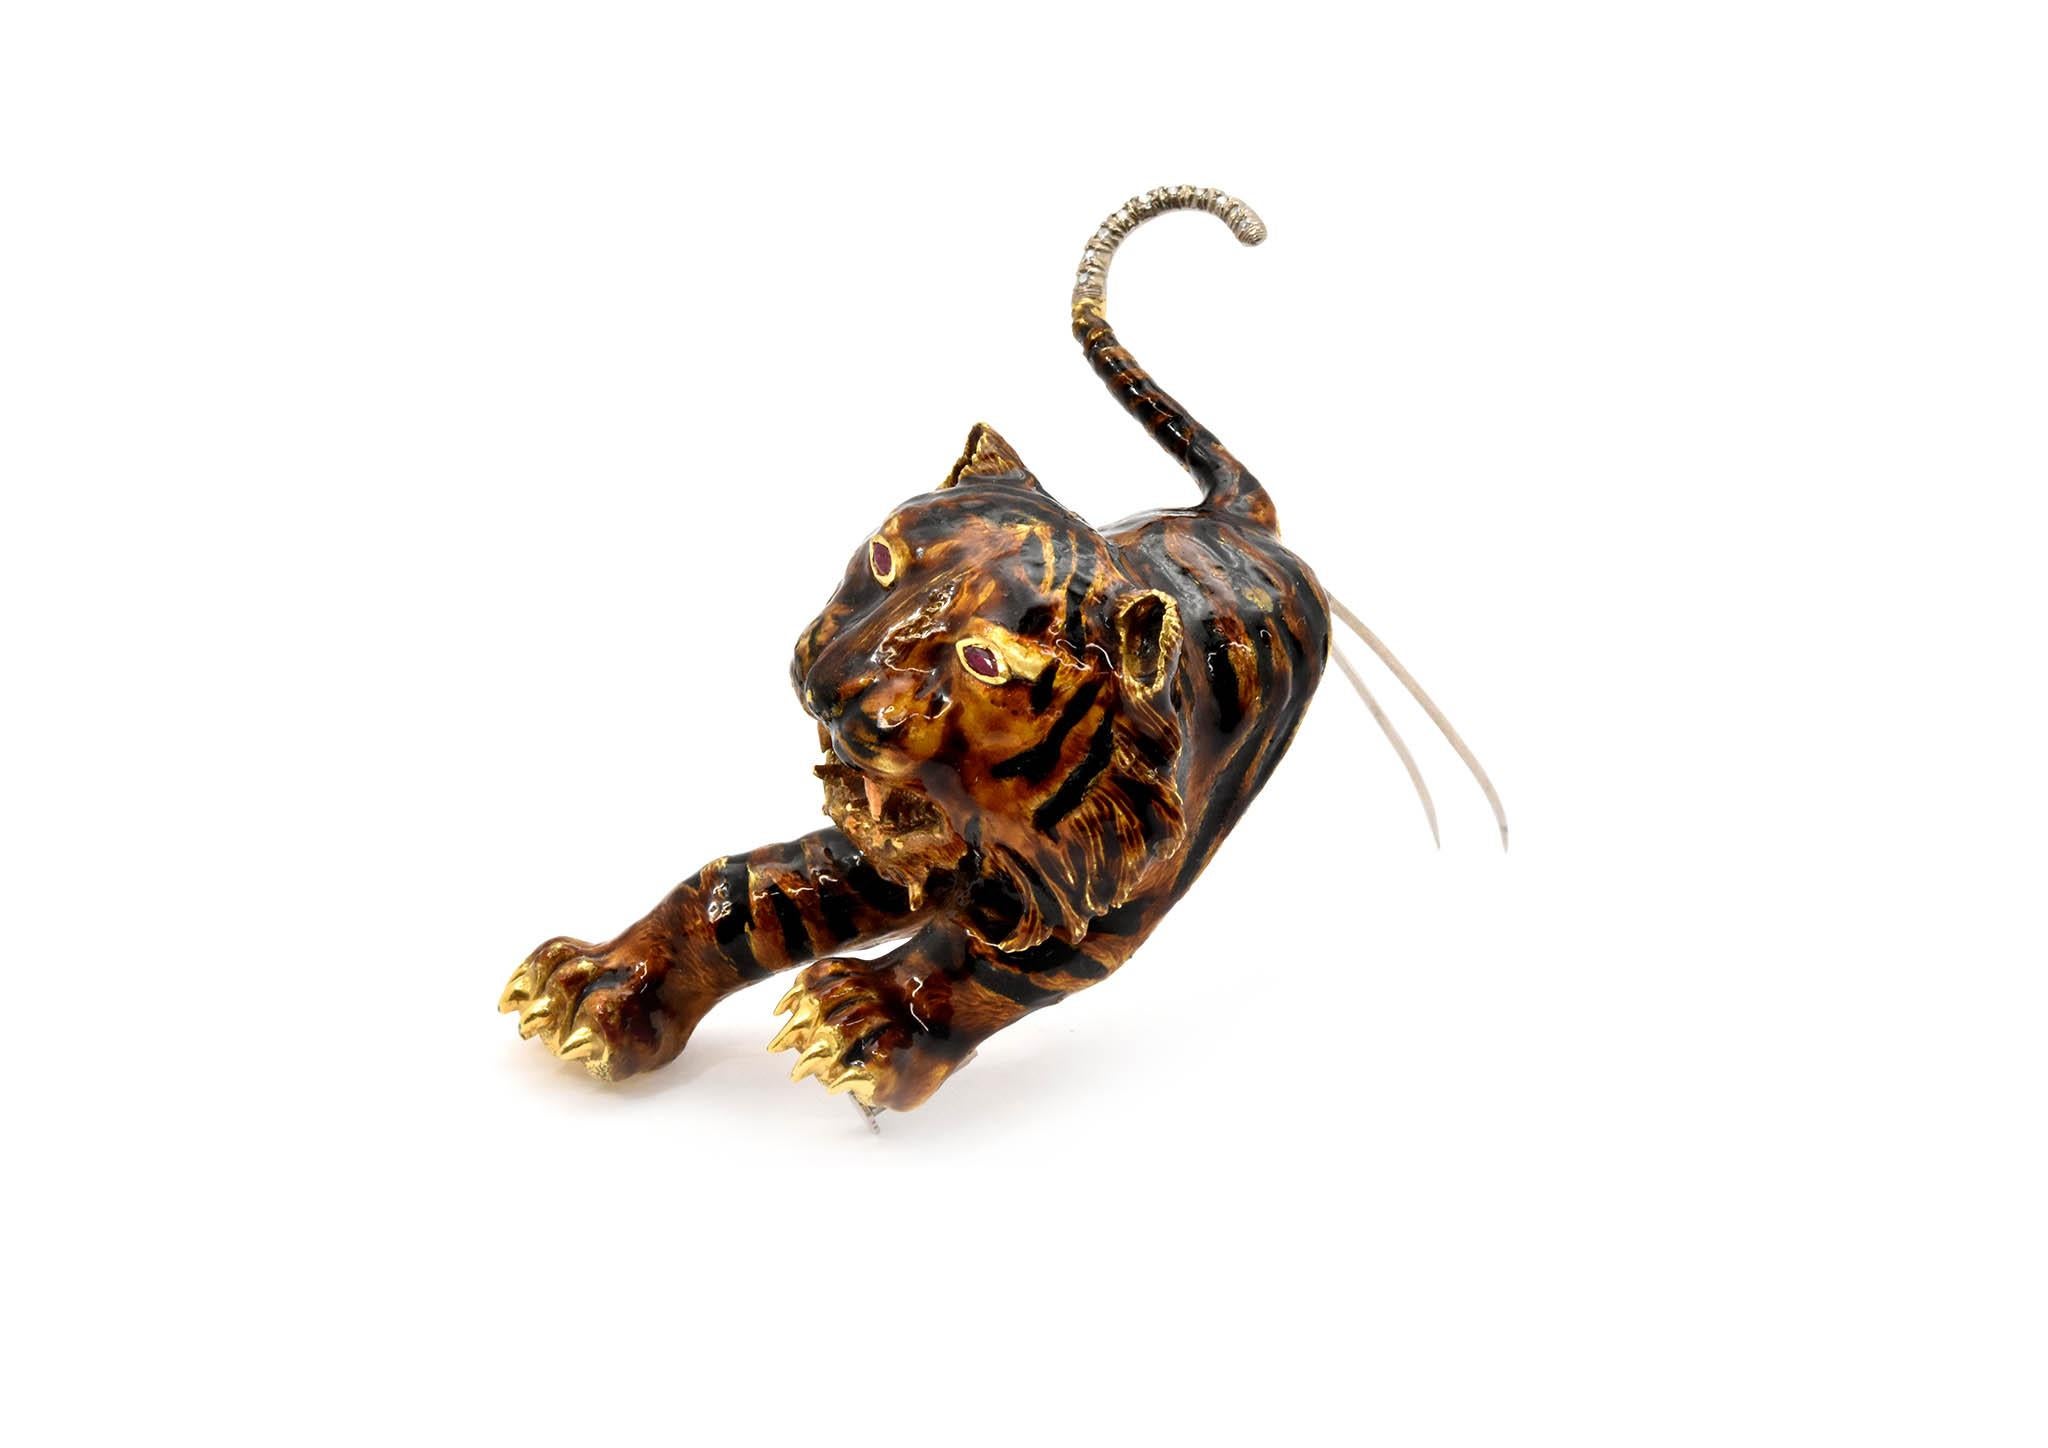 This one of a kind piece is crafted in 18k yellow gold. It resembles a tiger and is designed with black and gold enamel. Two marquise cut rubies are set as the tiger’s eyes. In addition, the tiger’s tail is set with ten round singe-cut diamonds,